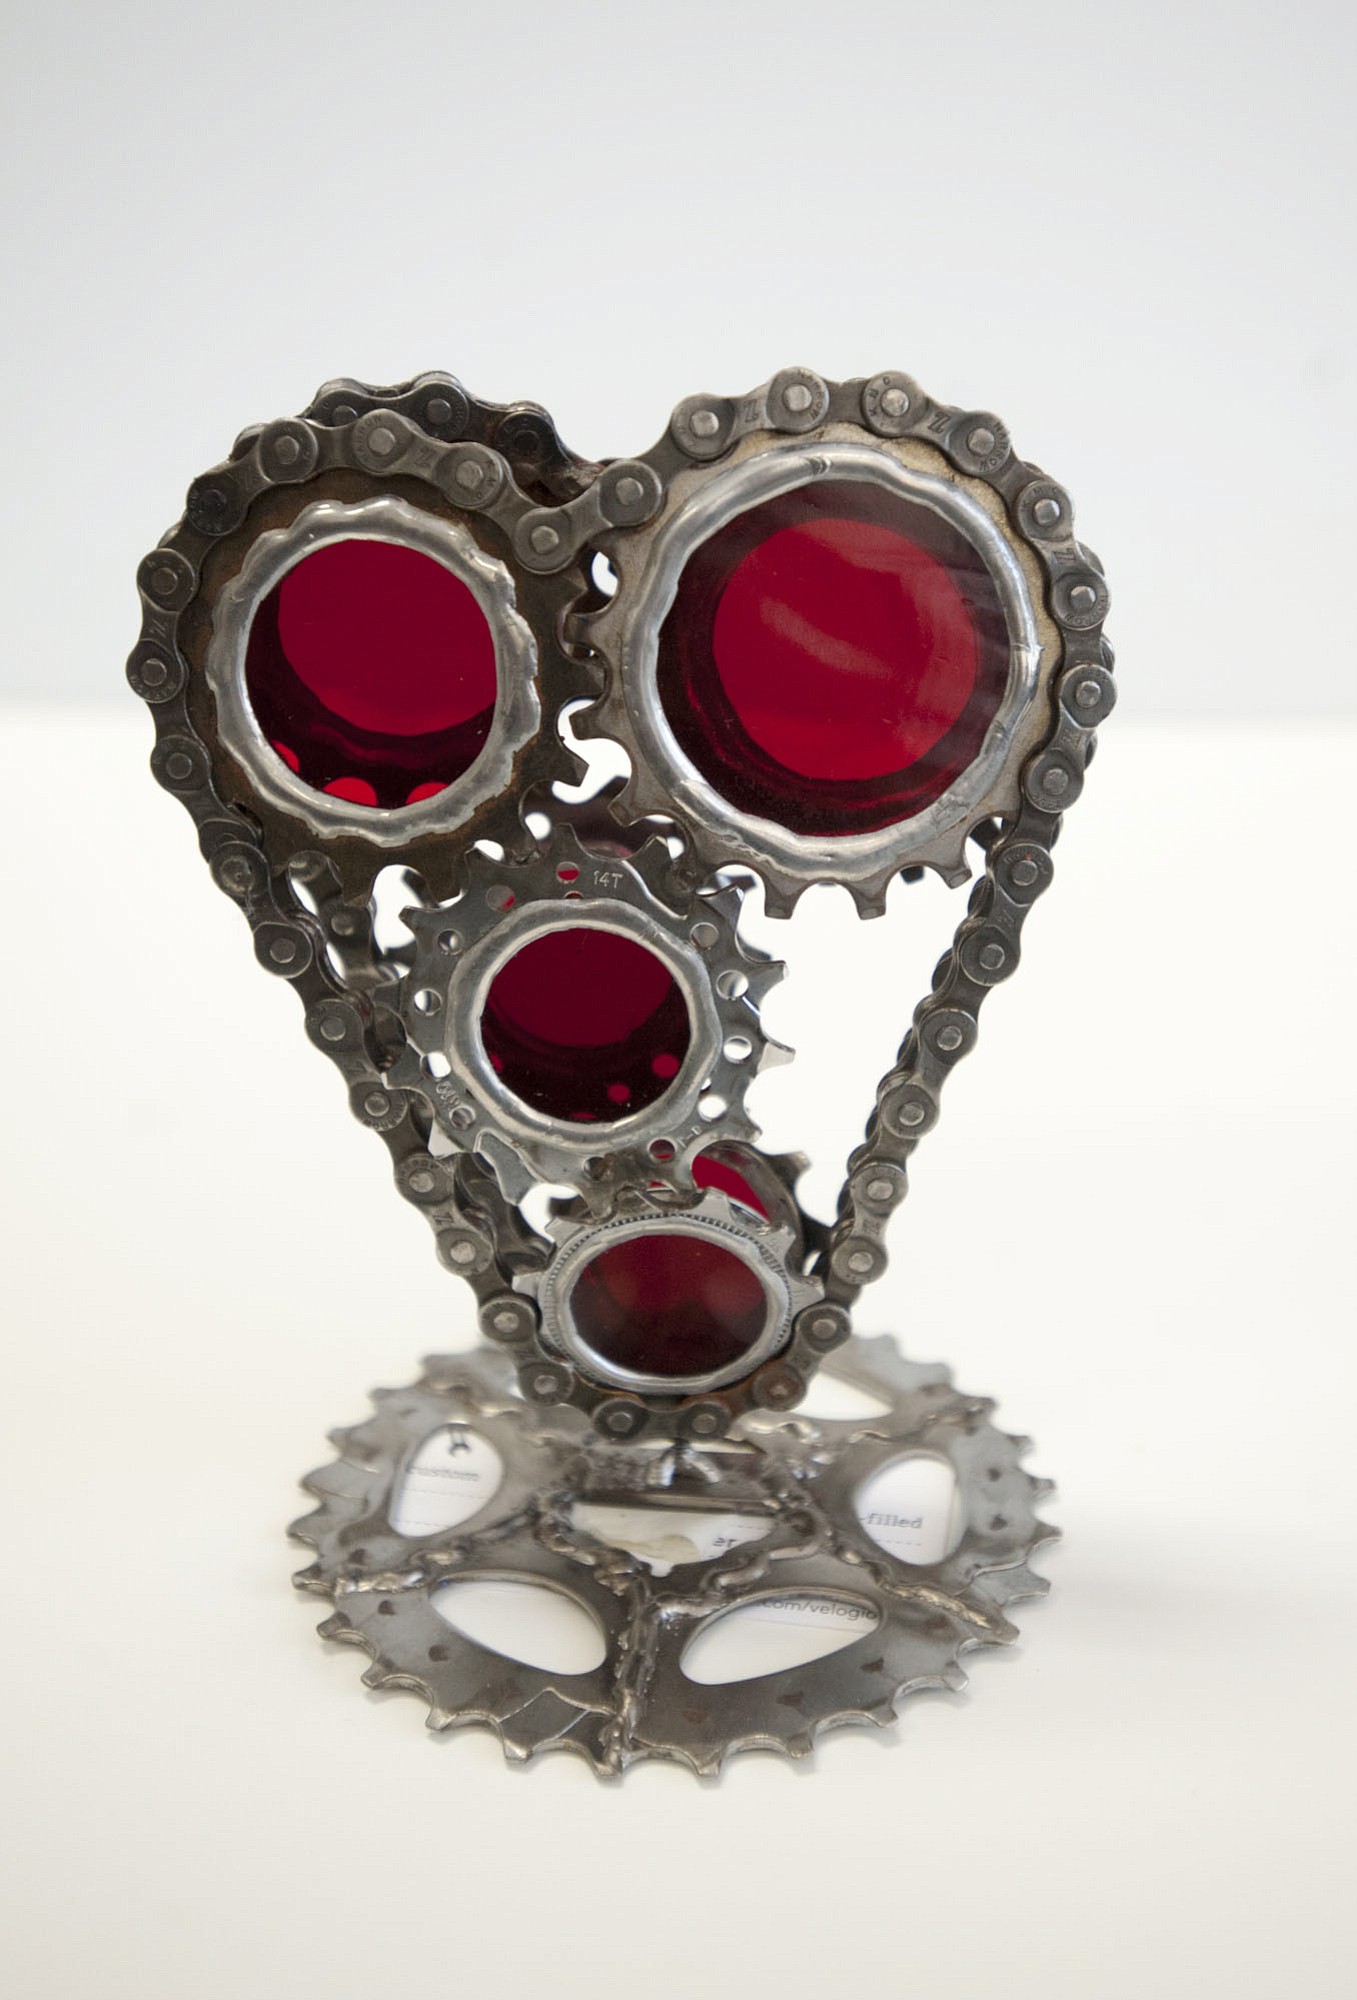 Brian Echerer's heart used old bike parts, including red safety reflectors.